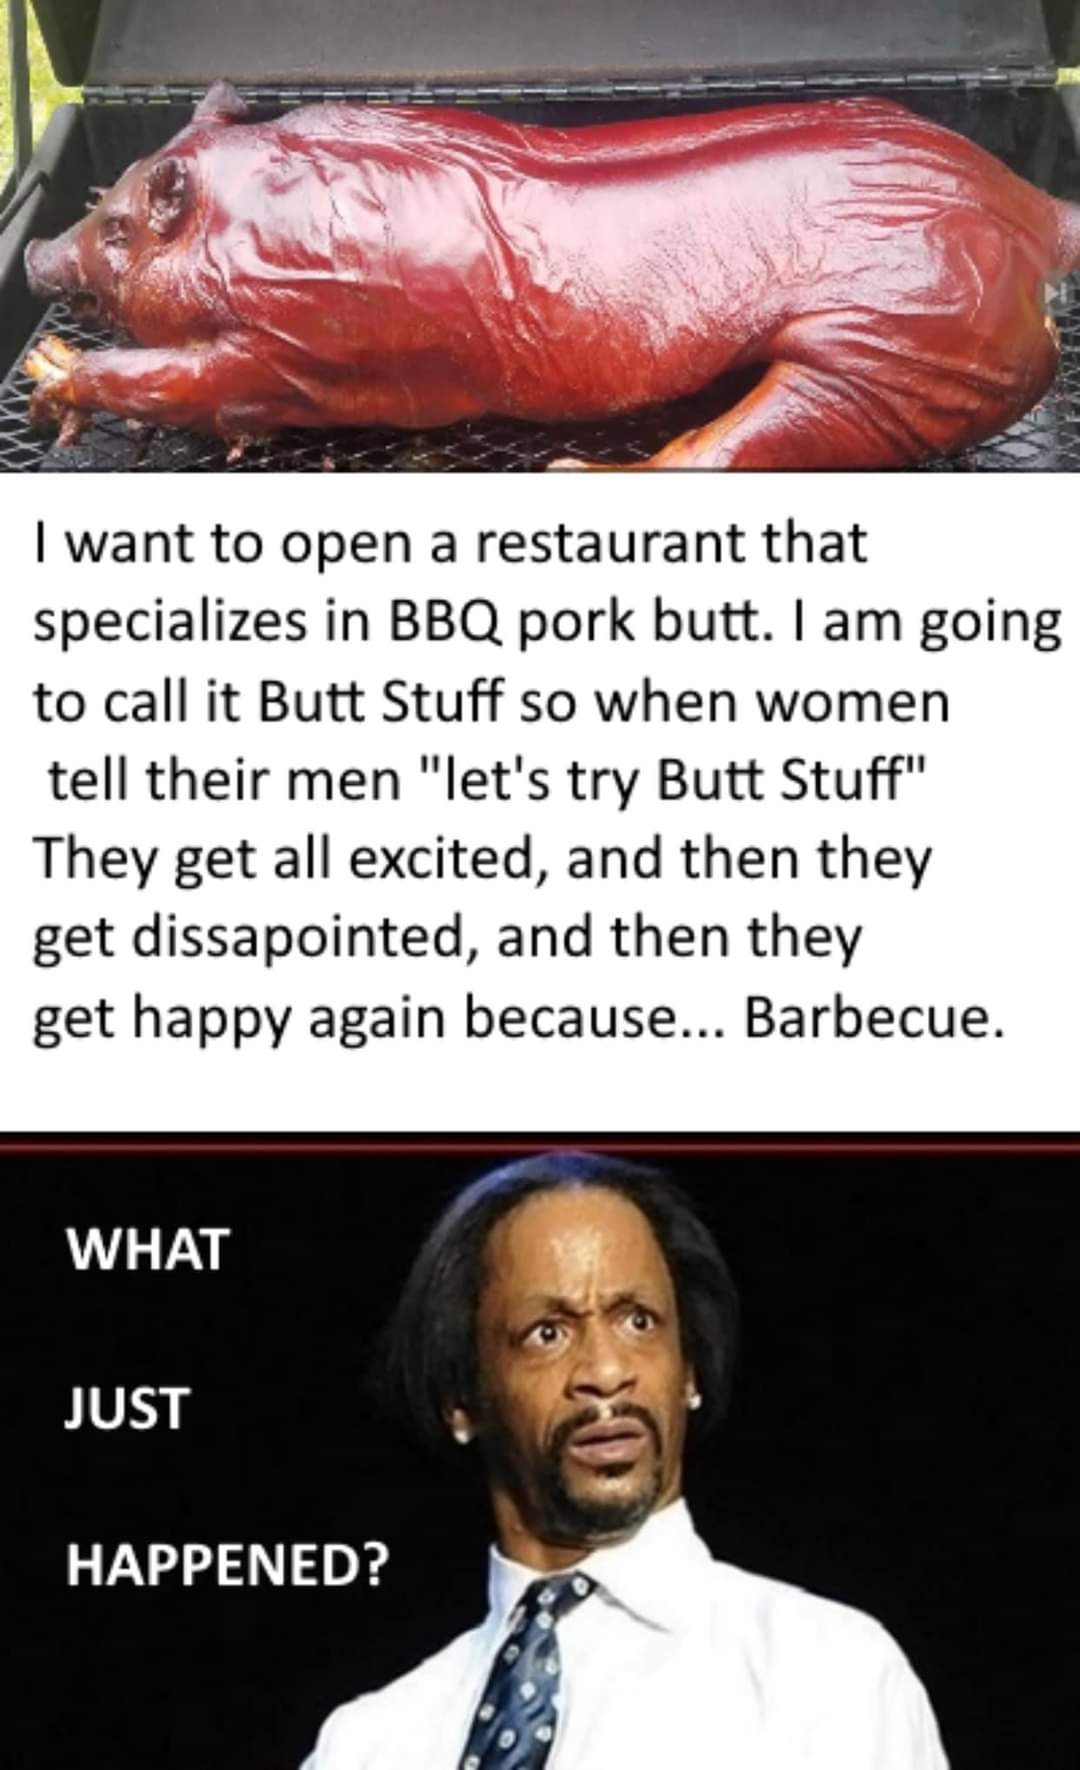 I would eat there...